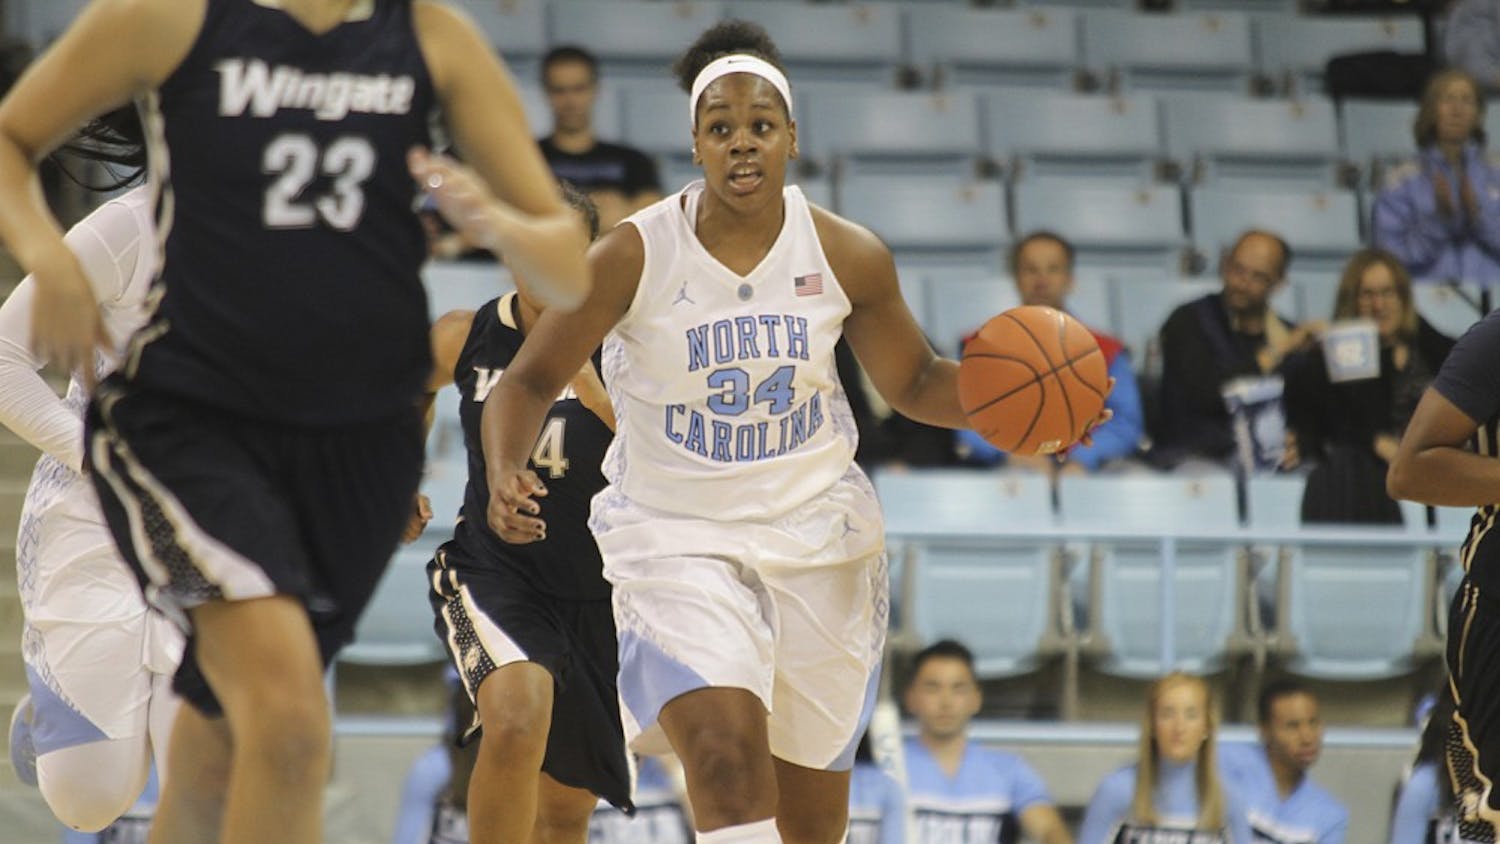 The UNC women's basketball team beat Wingate University 92-50 on Monday night. Xylina McDaniel dribbles towards the basket. McDaniel scored 7 points during the game.